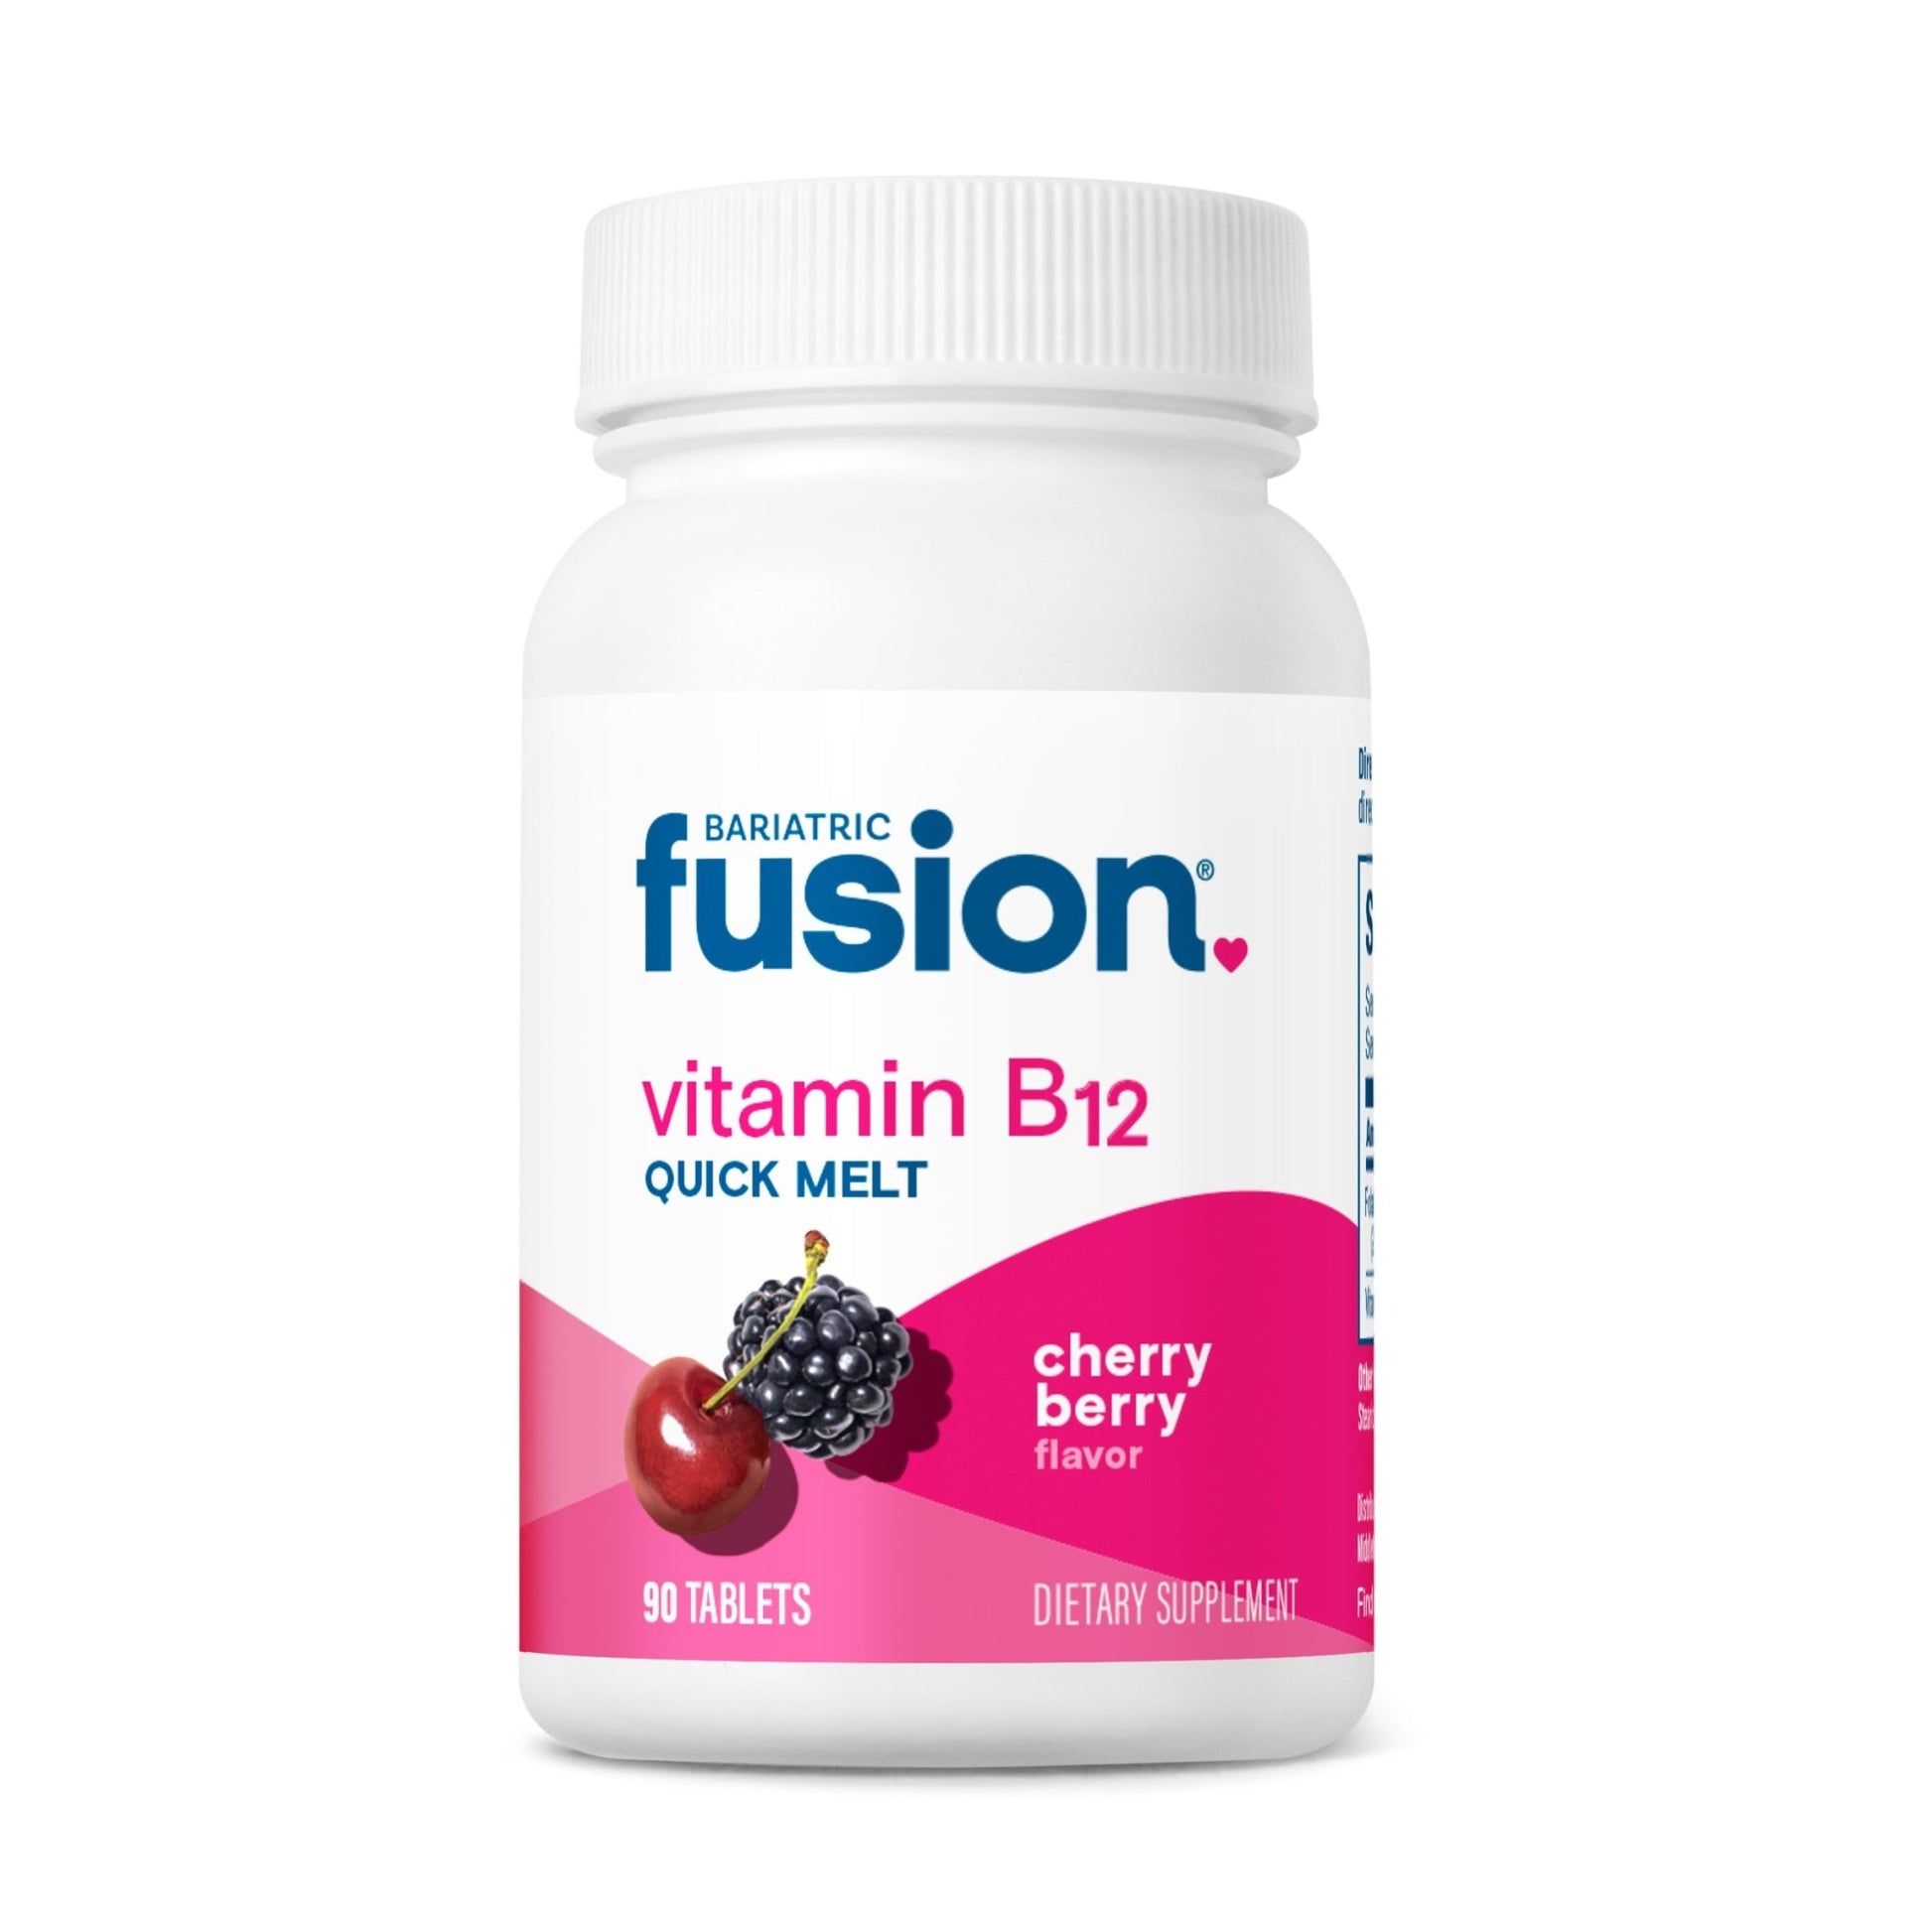 Bariatric Fusion Cherry-Berry Vitamin B12 Quick Melt 90 chewable tablets.